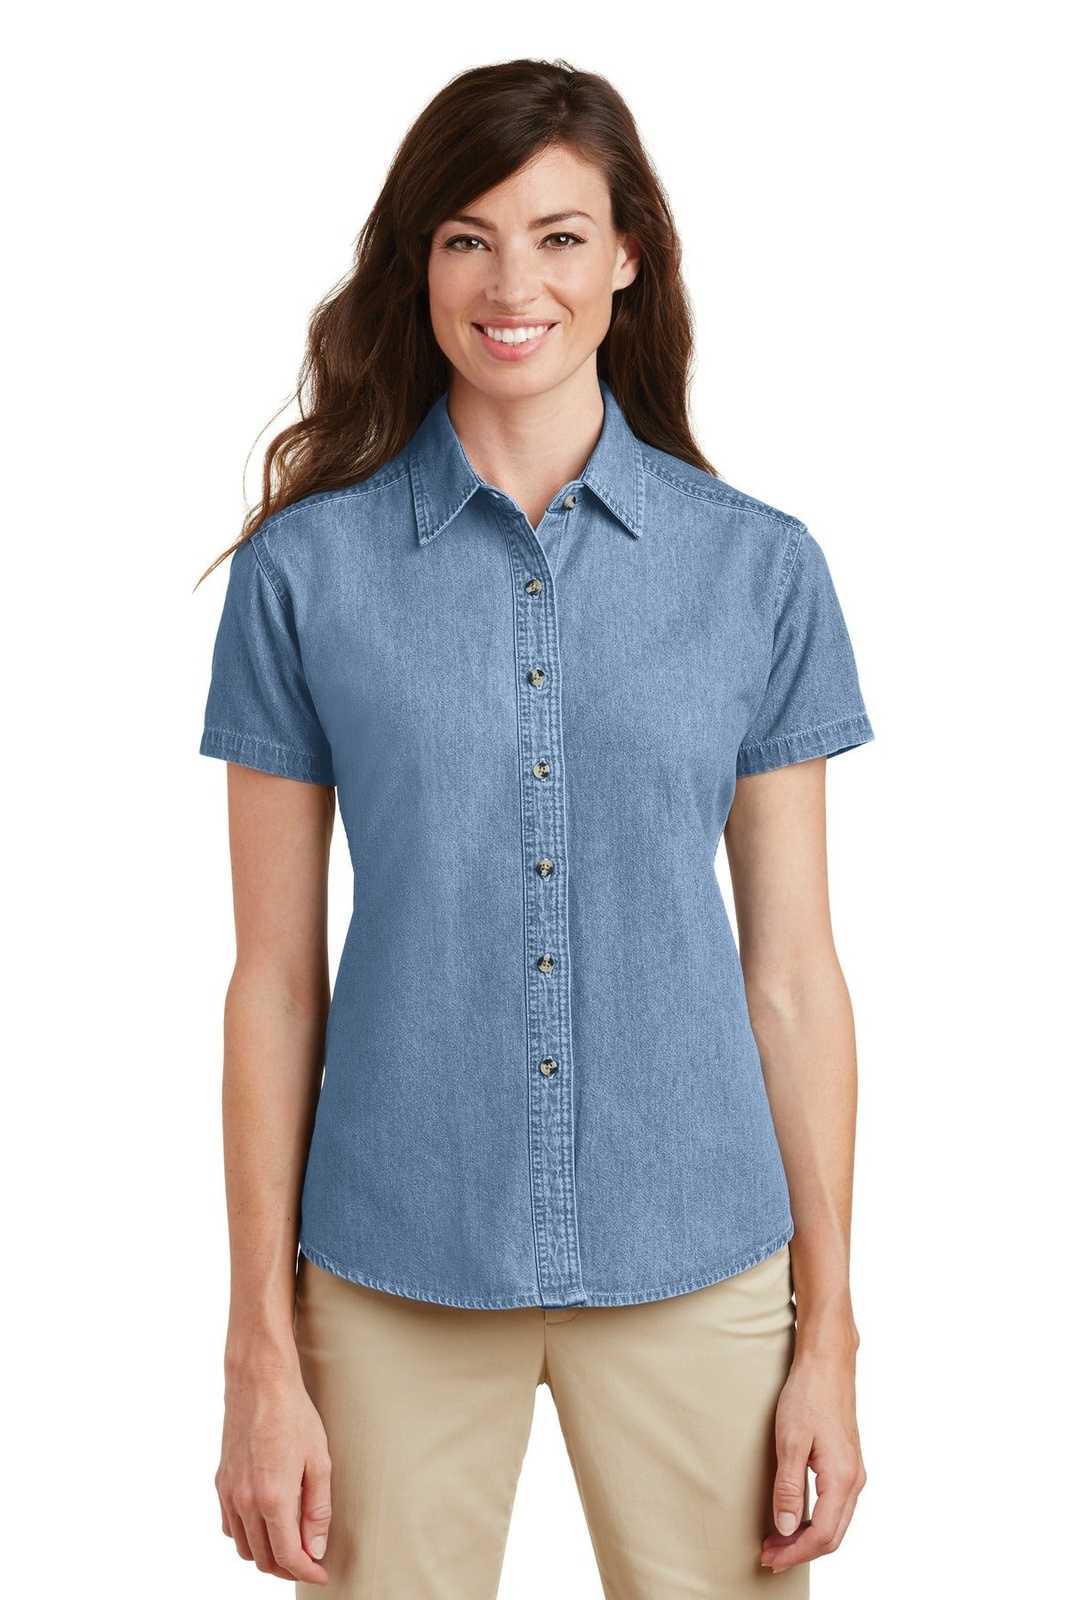 Port & Company LSP11 Ladies Short Sleeve Value Denim Shirt - Faded Blue - HIT a Double - 1